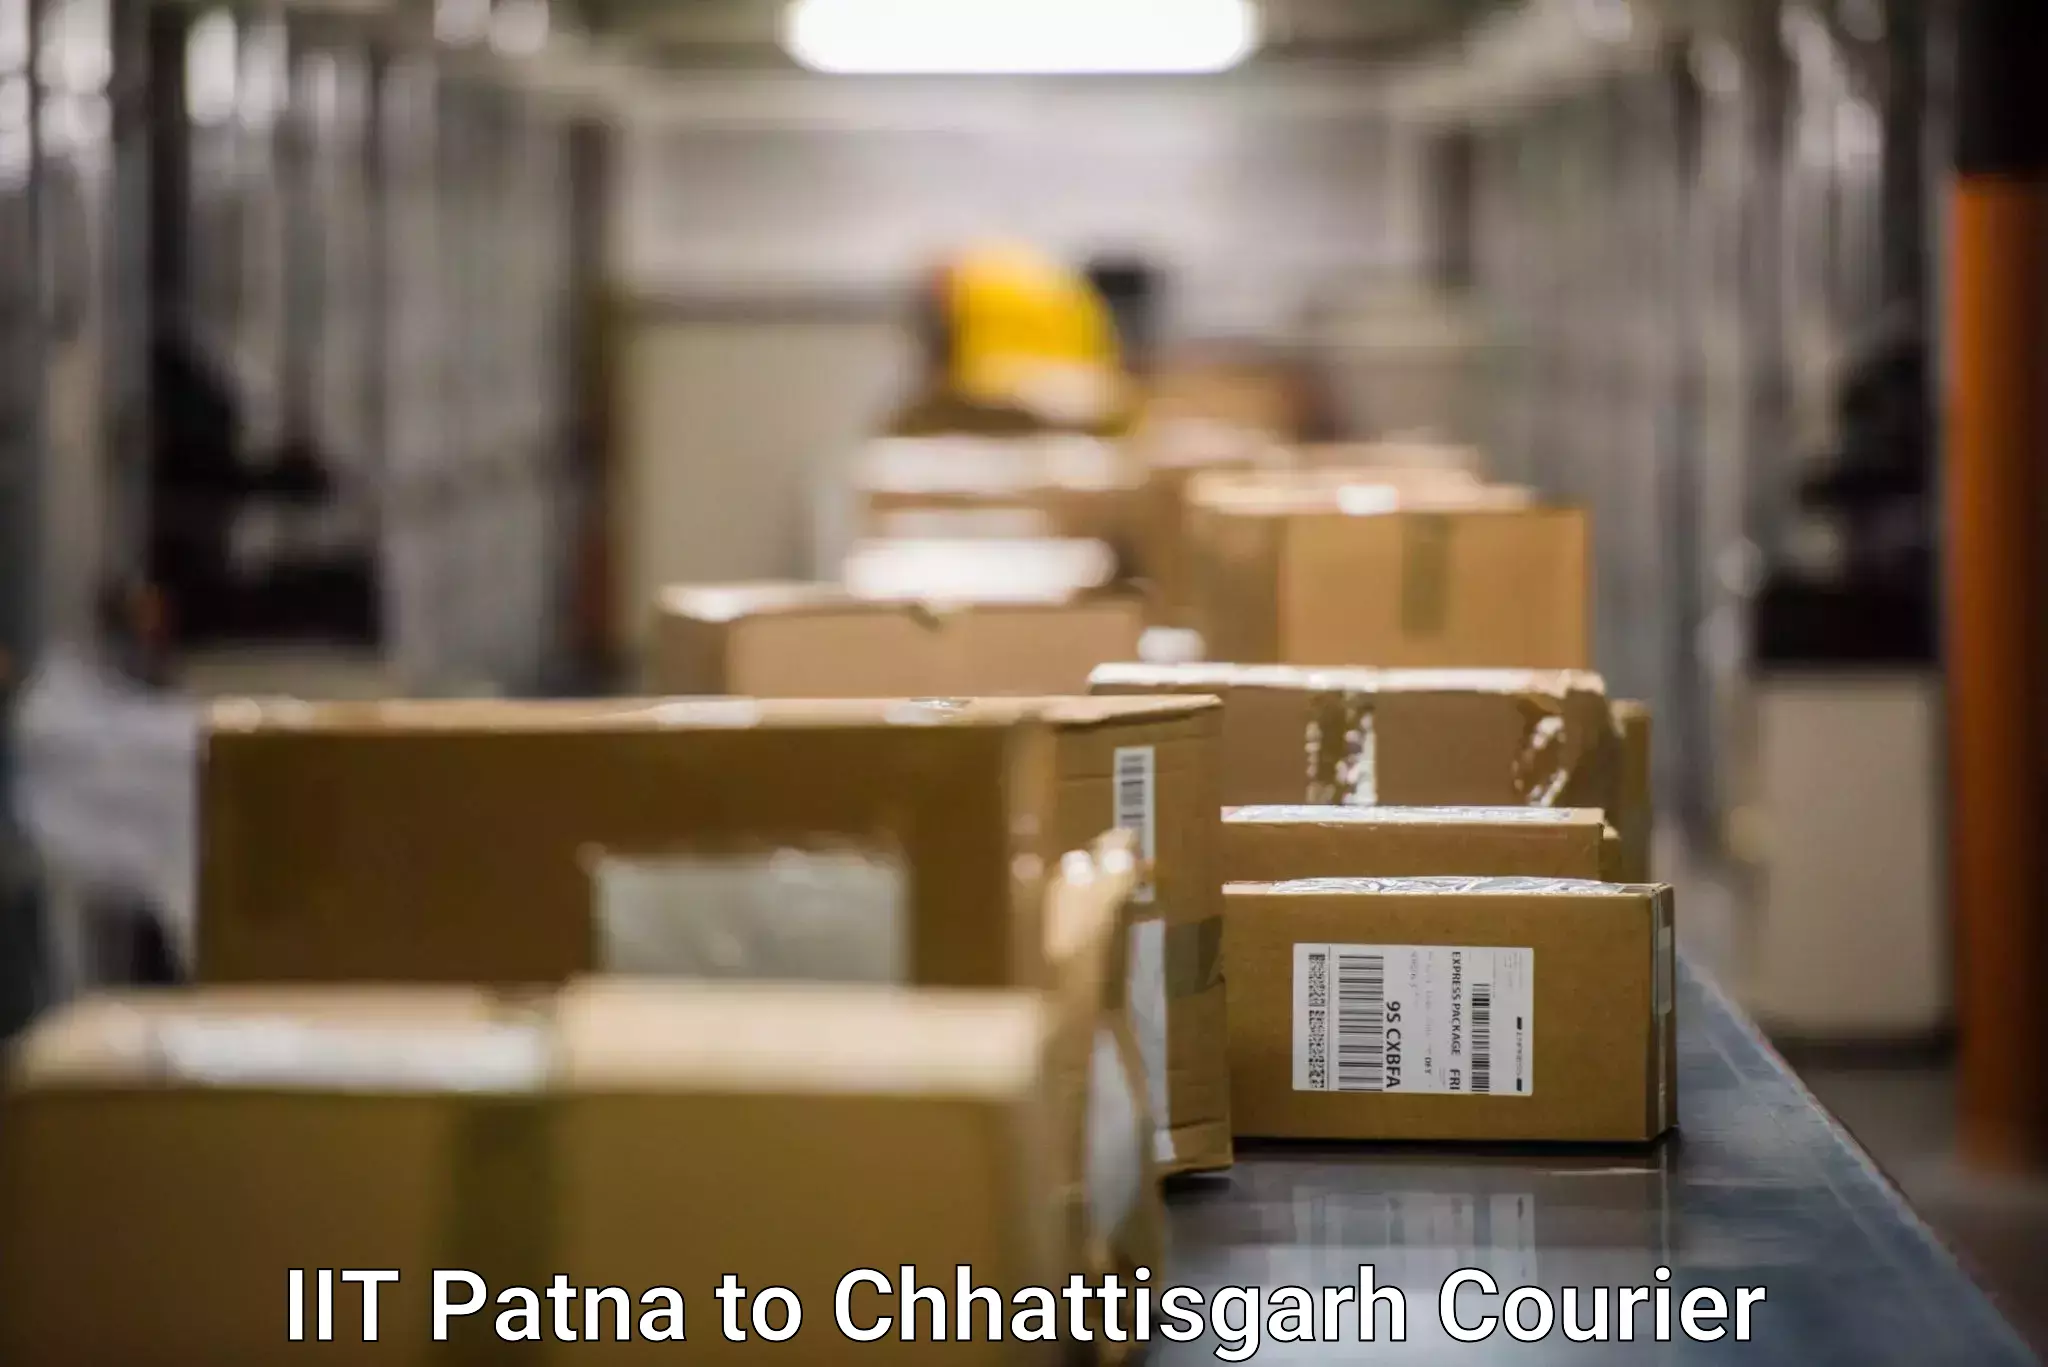 On-call courier service IIT Patna to Pakhanjur